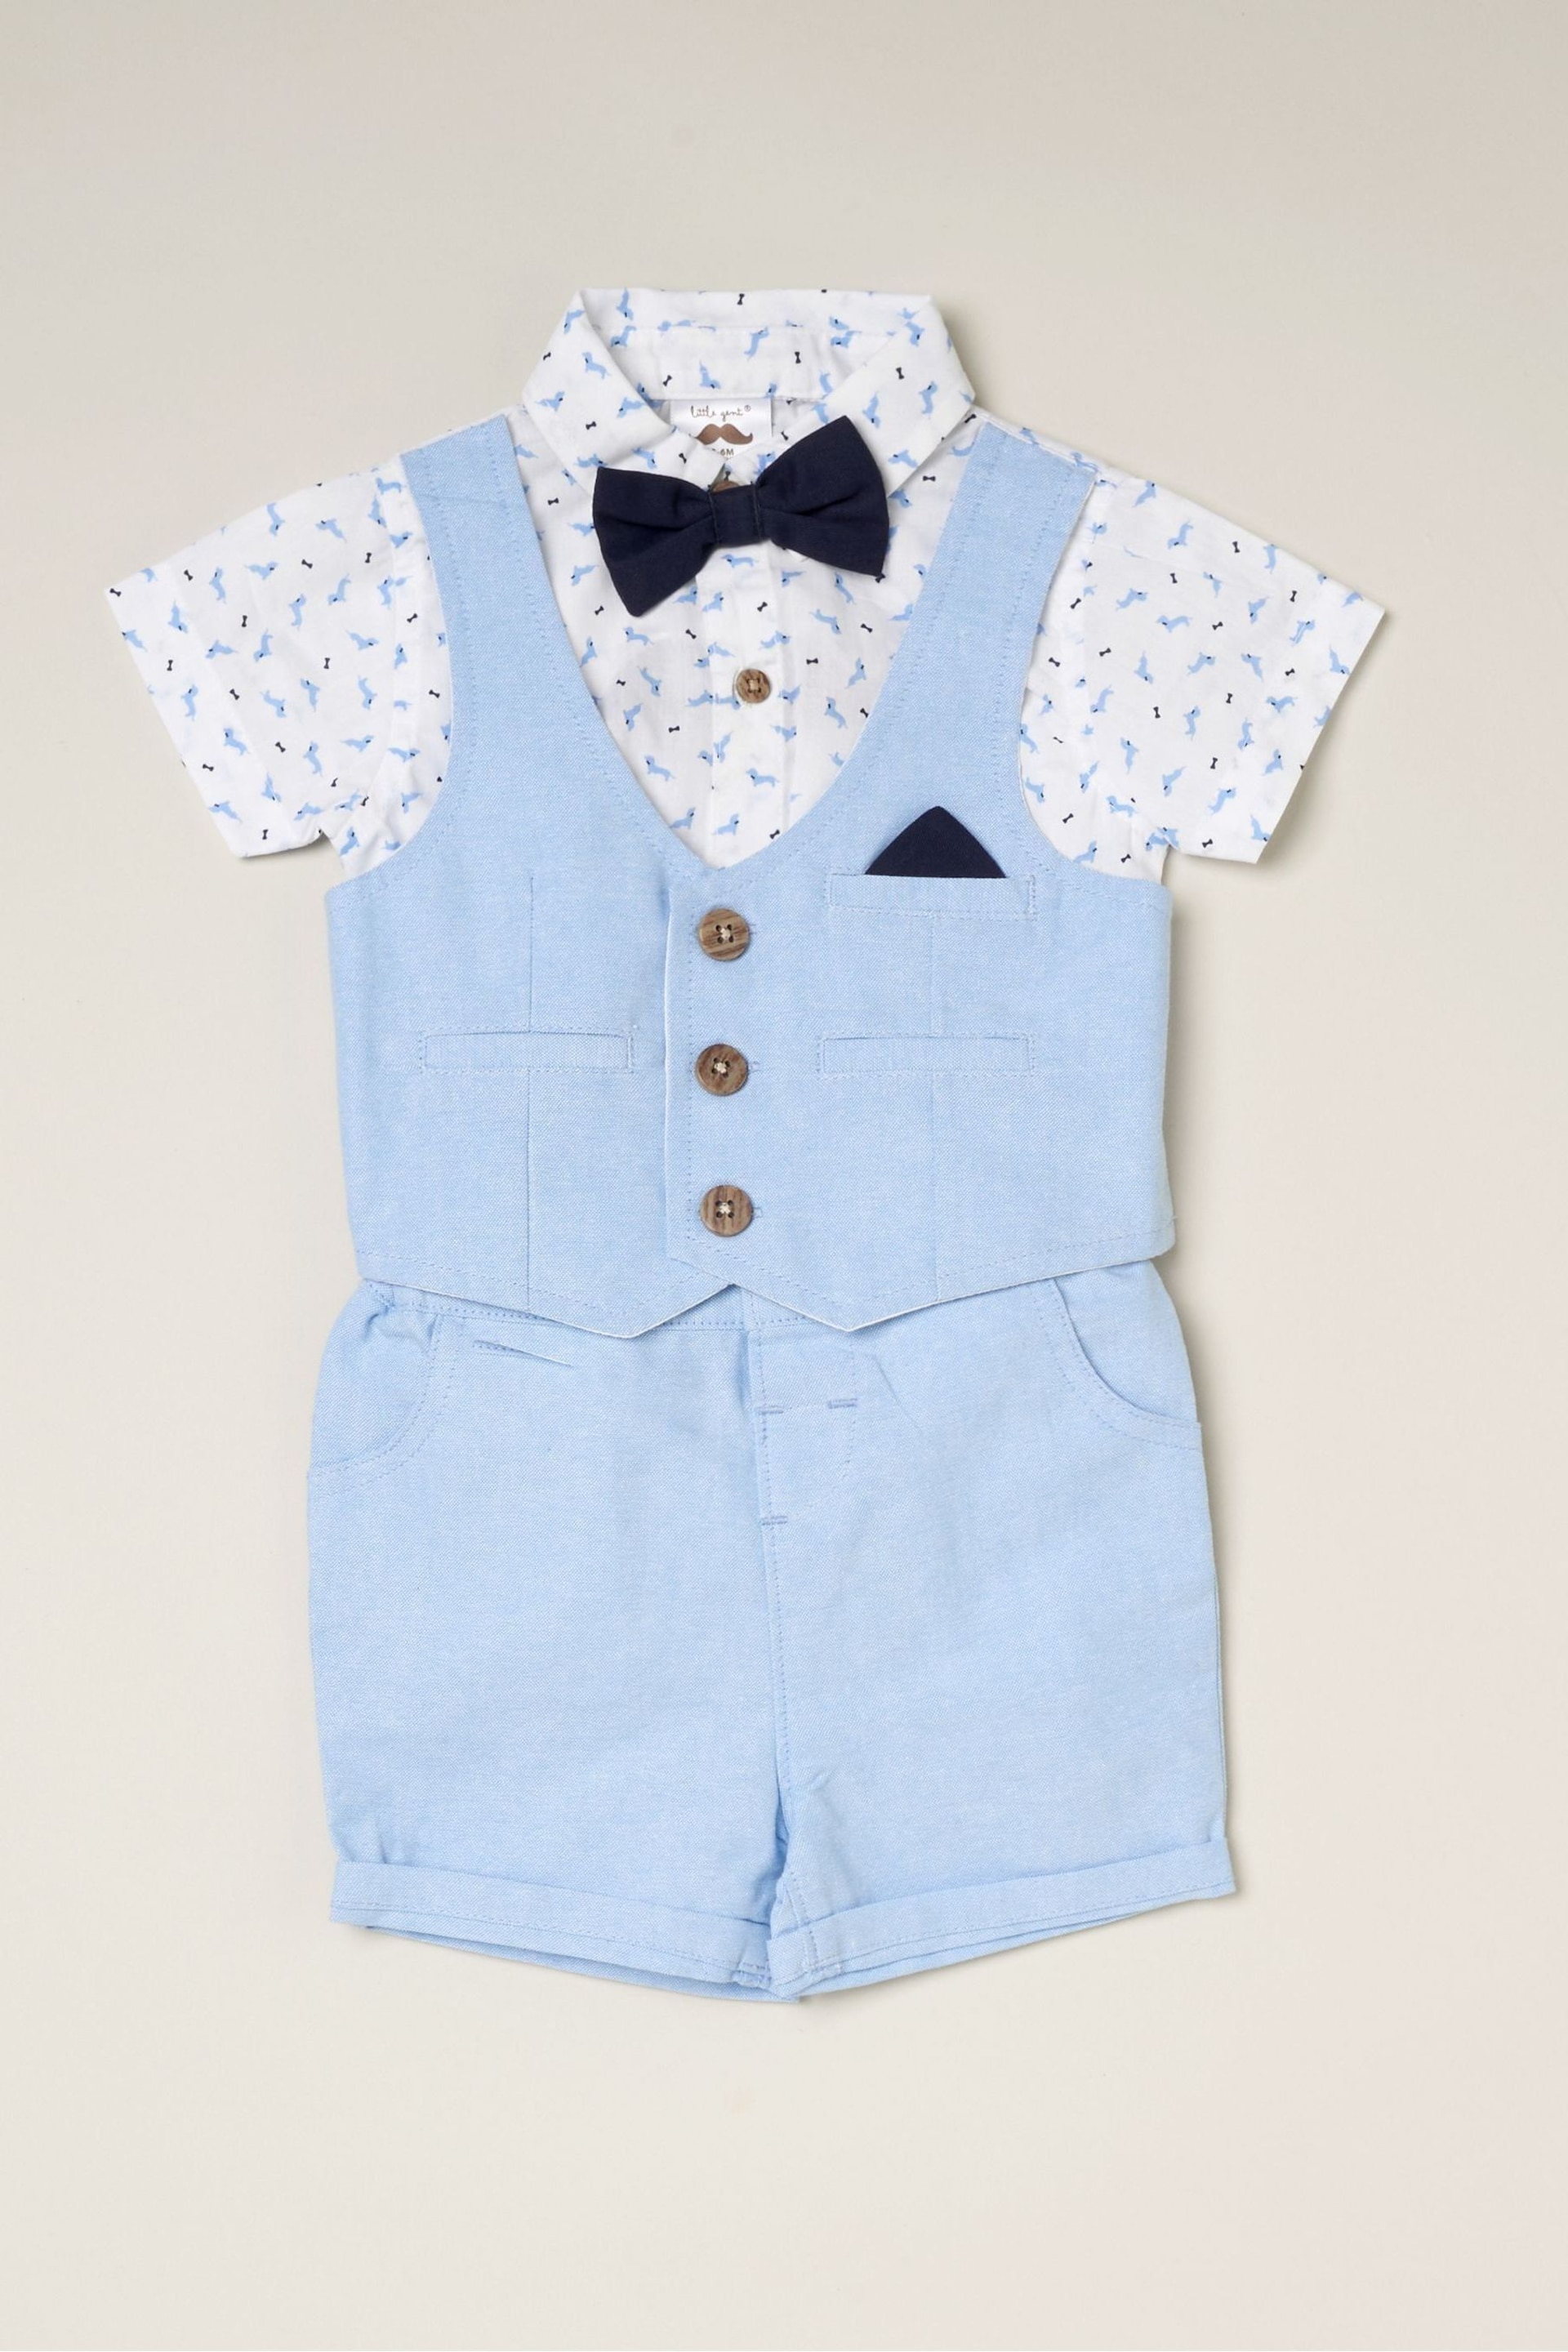 Little Gent Blue Shirt Style Bodysuit Shorts And Bowtie Outfit Set - Image 1 of 4